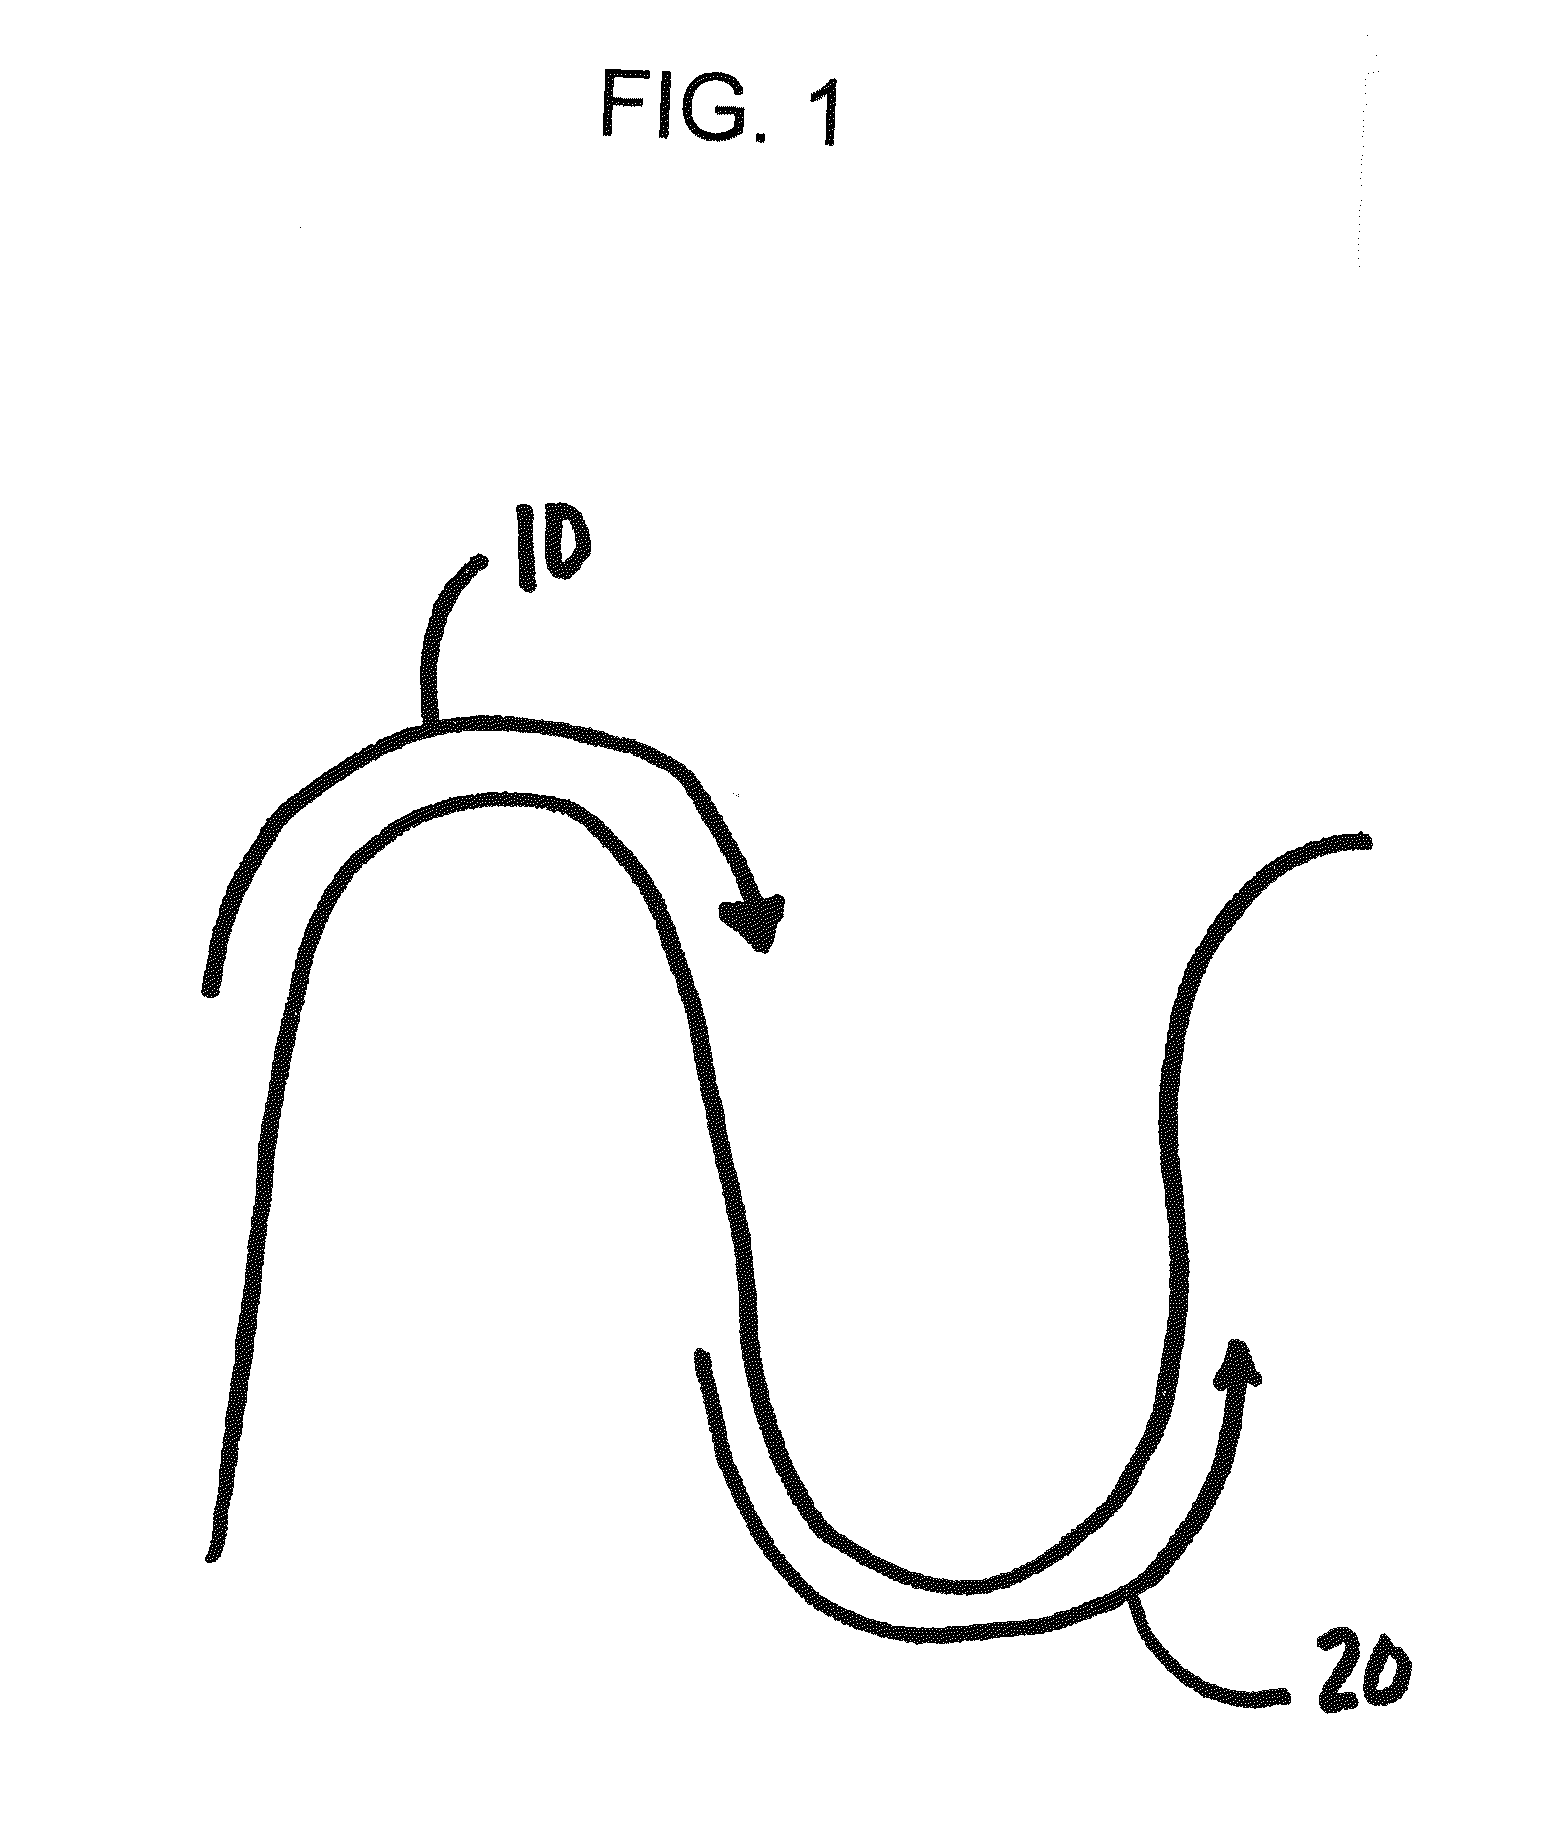 Medical balloon devices and methods